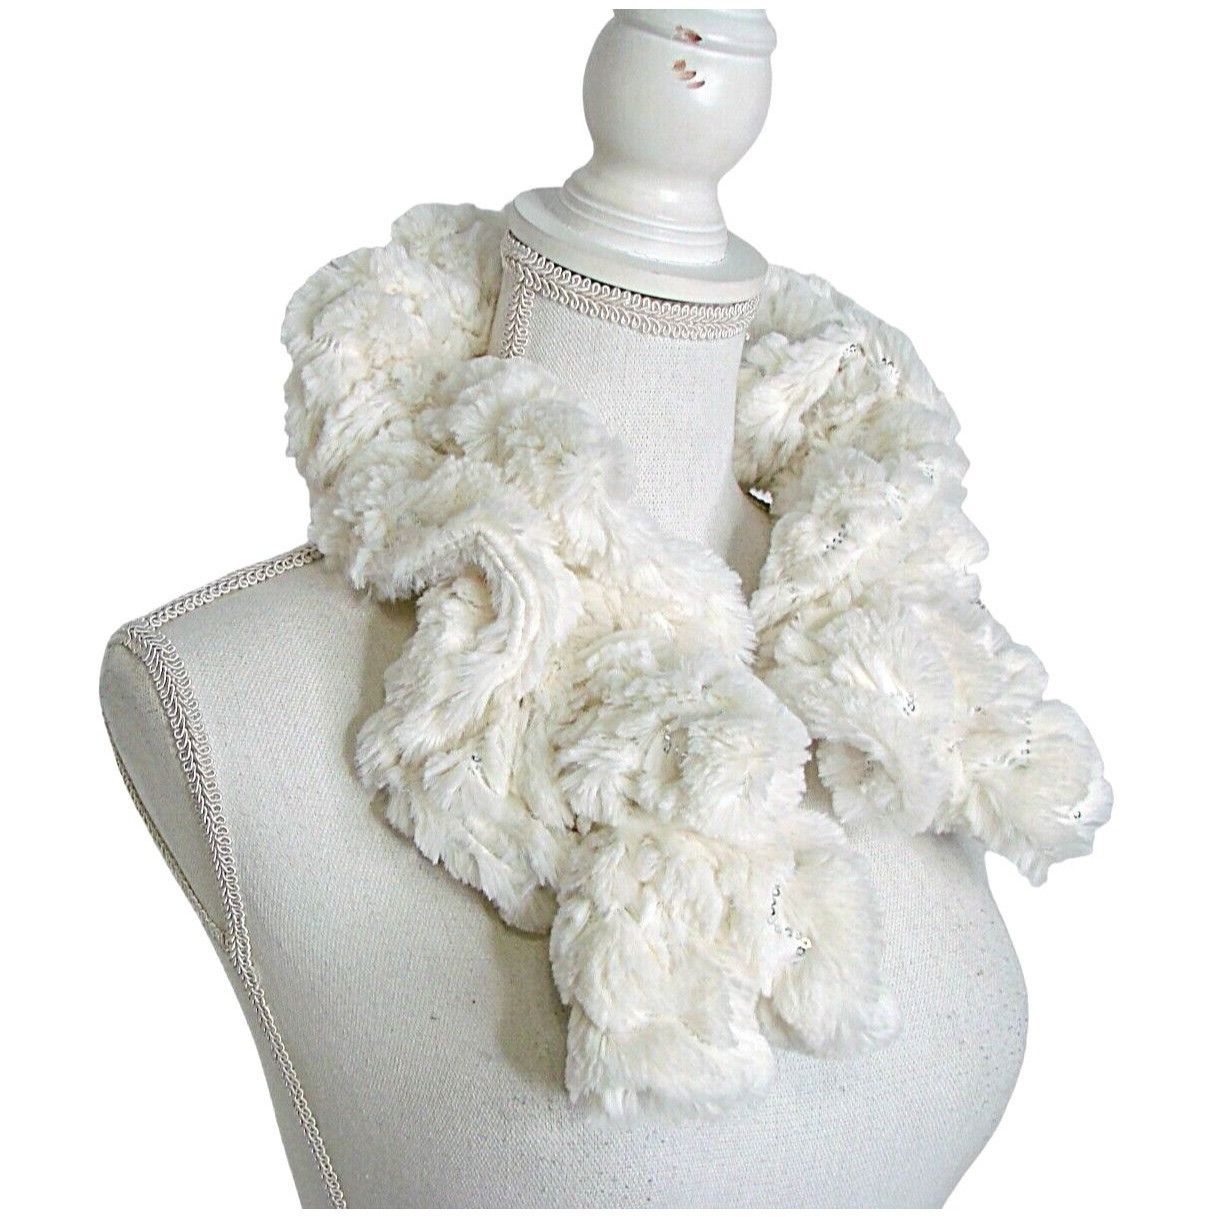 Other Faux Fur Stretchable Scarf Neck Warmer White Gold Sequin Pul ...